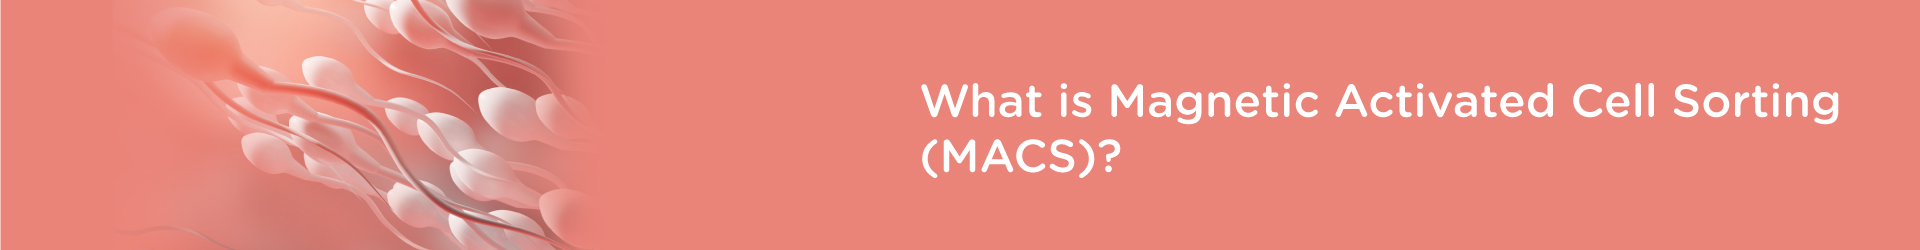 What is Magnetic-Activated Cell Sorting (MACS)?